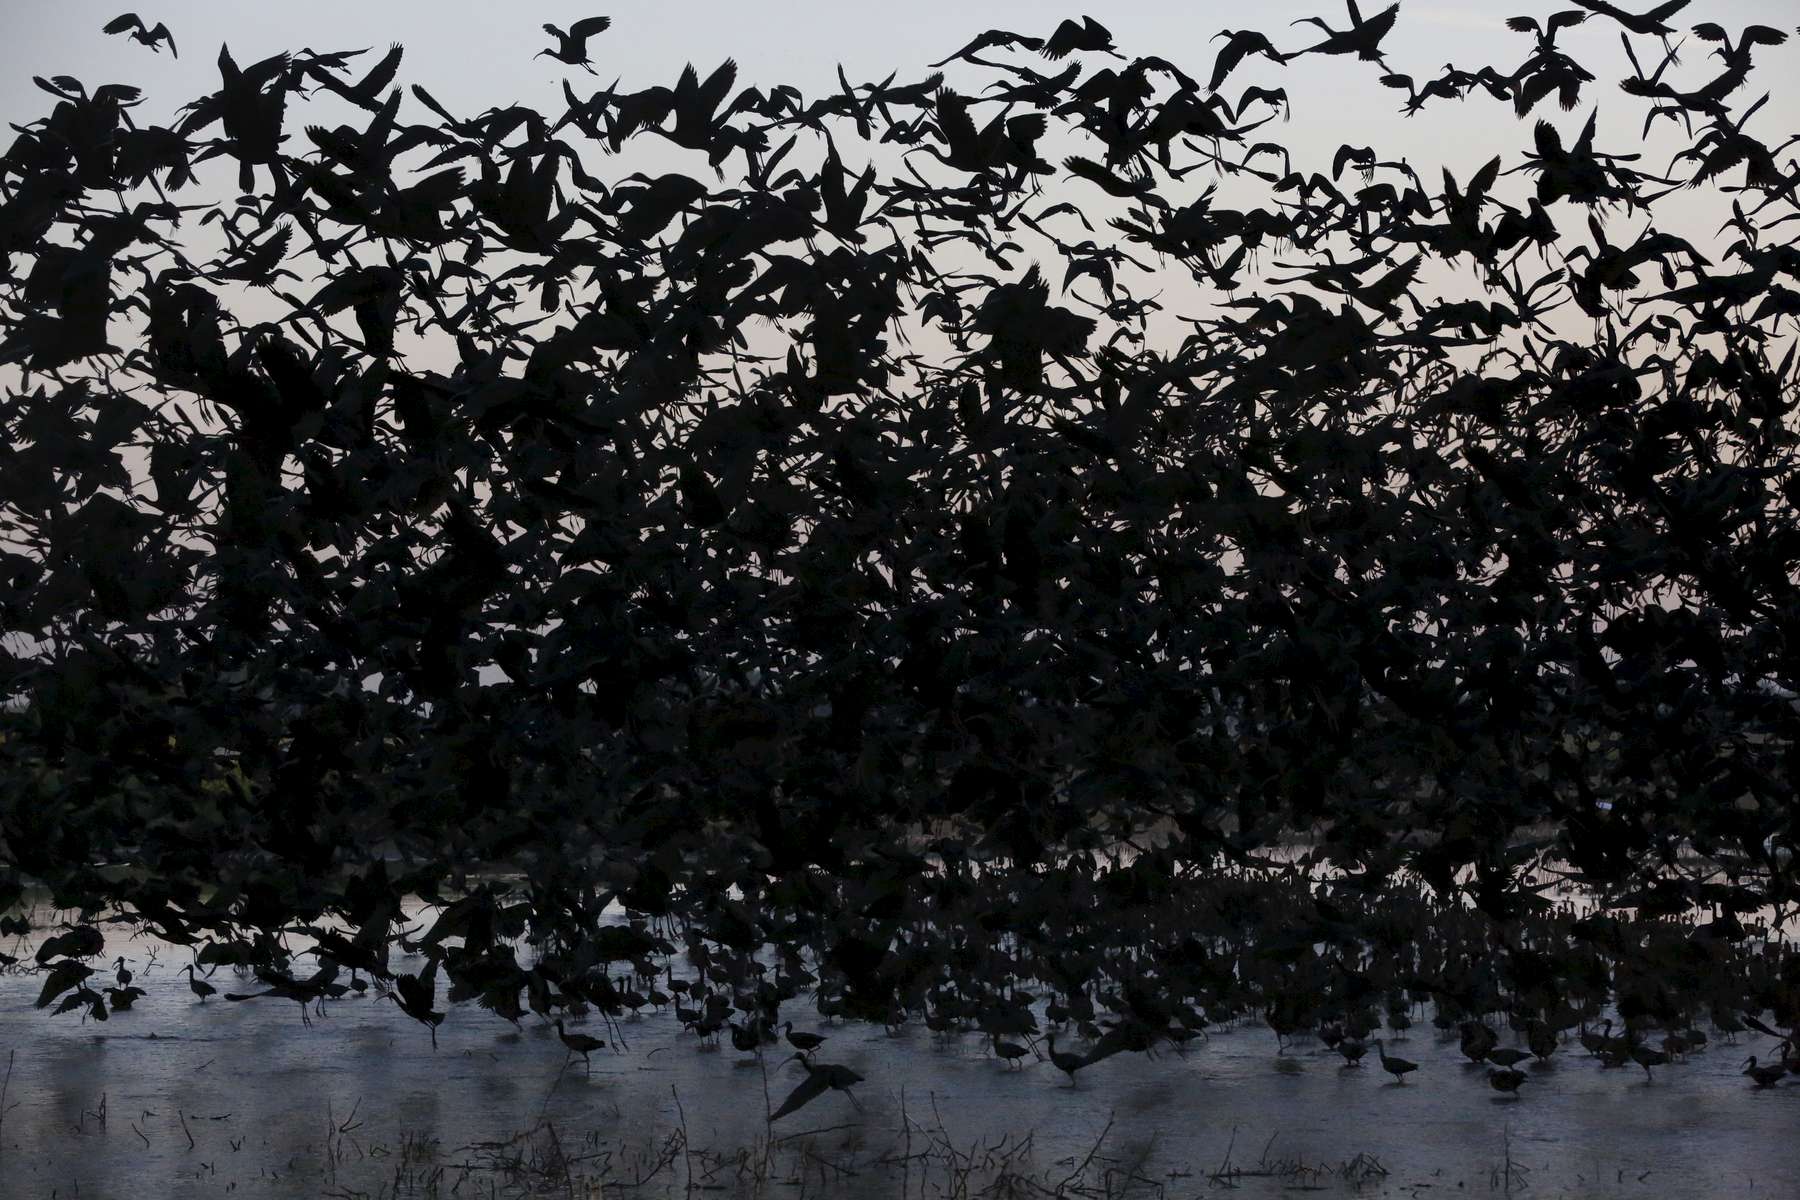 Hundreds of White-faced Ibis take off at dawn from a pond created from pumped ground water at Merced National Wildlife Refuge April 16, 2015 in Merced, Calif. The refuge is a restored wildlife area that reflects the habitat that used to be found in the Central Valley before agriculture took over the region. The small pond provides much-needed breeding and wintering habitat for thousands of birds. Because of the drought, the refuge received no surface water allocation and were forced to pump groundwater to keep up the wetlands and the crops they grow for habitat.